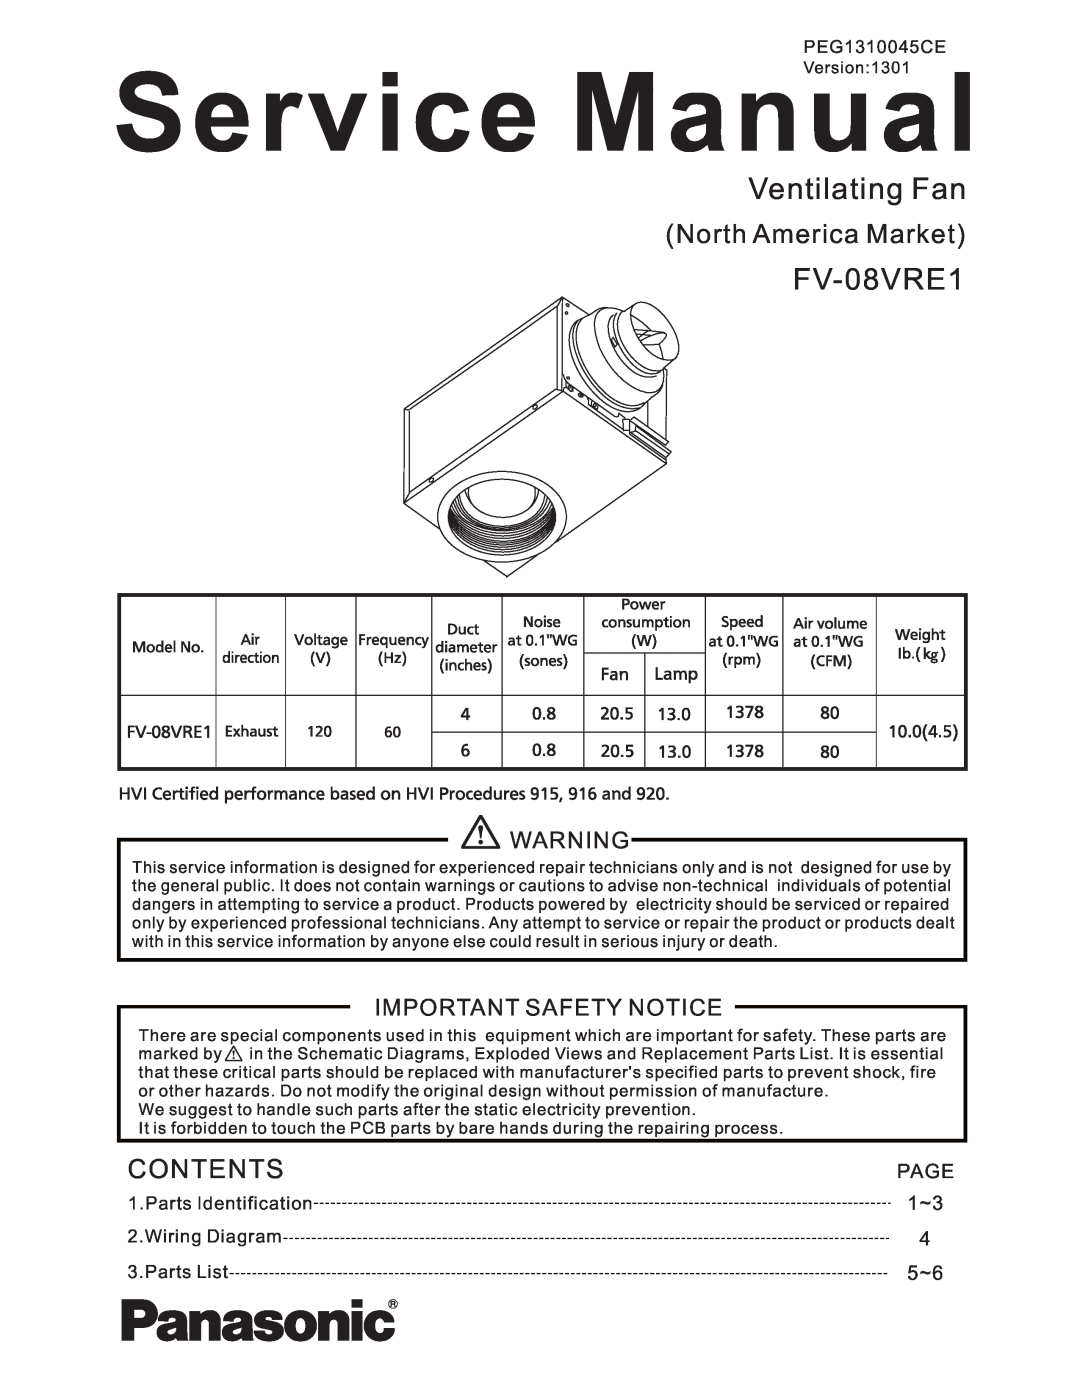 Panasonic FV-08VRE1 service manual Ventilating Fan, North America Market, Contents, Important Safety Notice, Page 